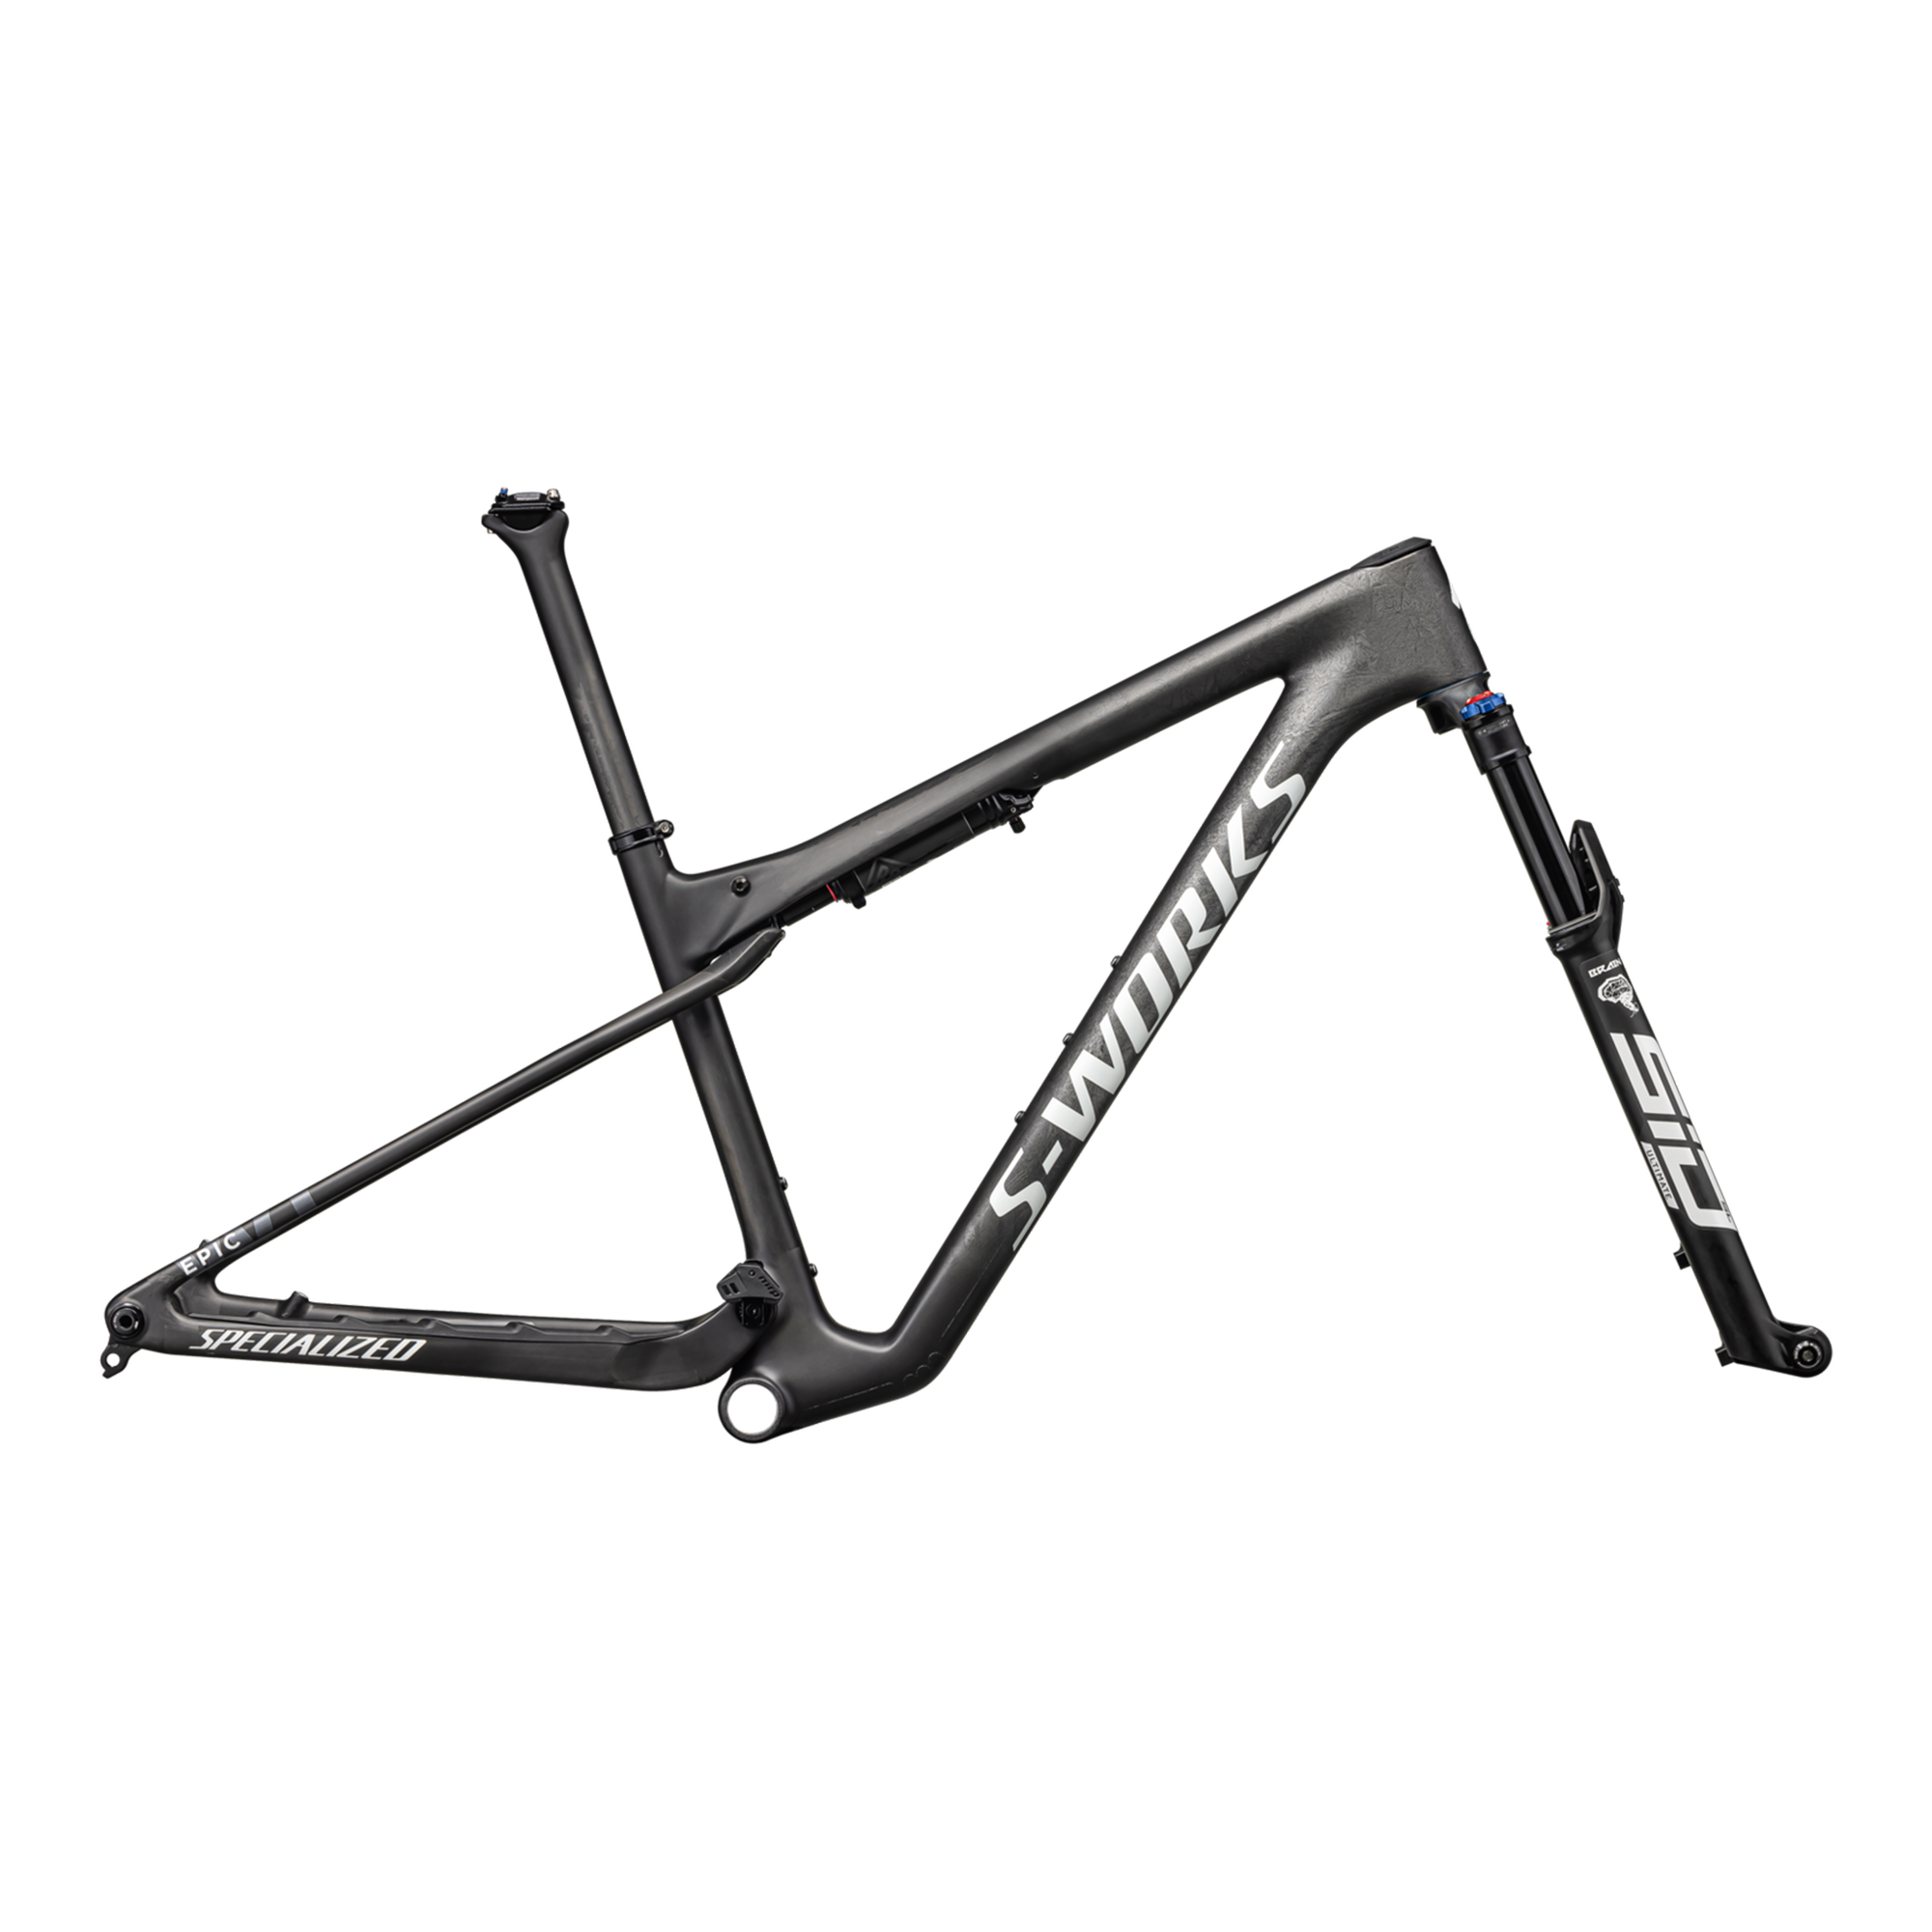 Cuadro S-Works Epic World Cup